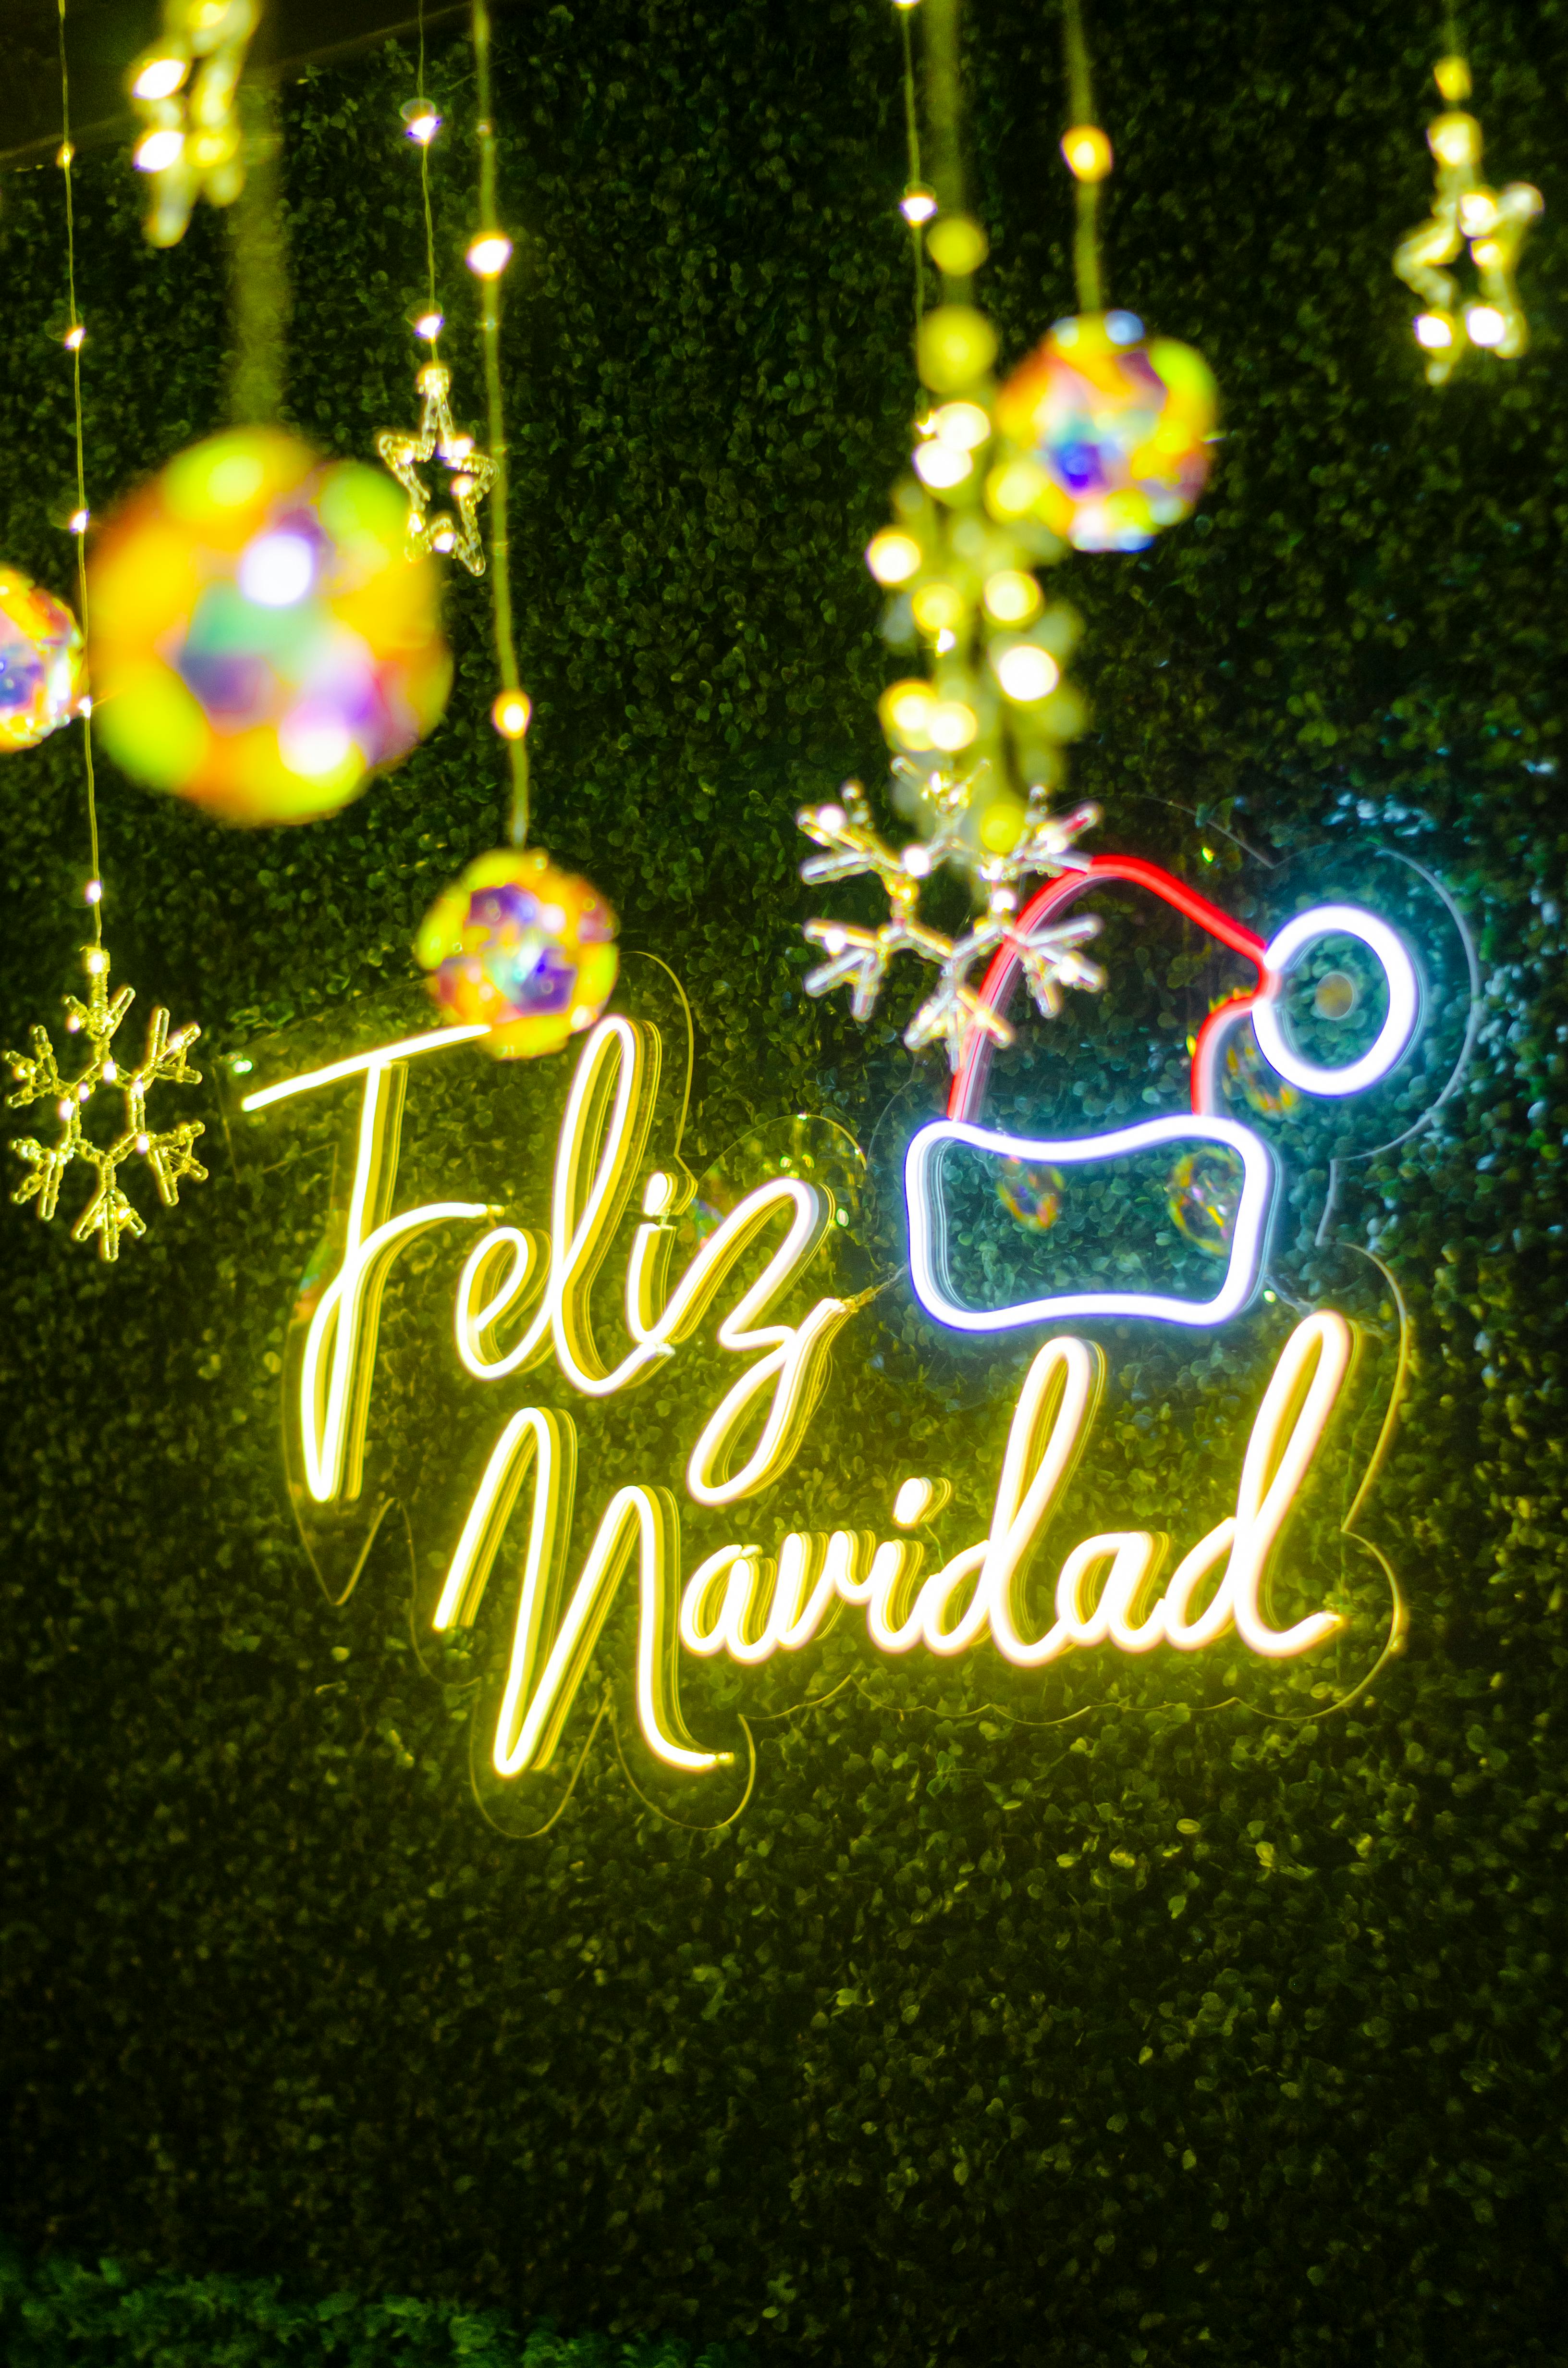 Neon Decorations with Christmas Greetings in Spanish · Free Stock Photo